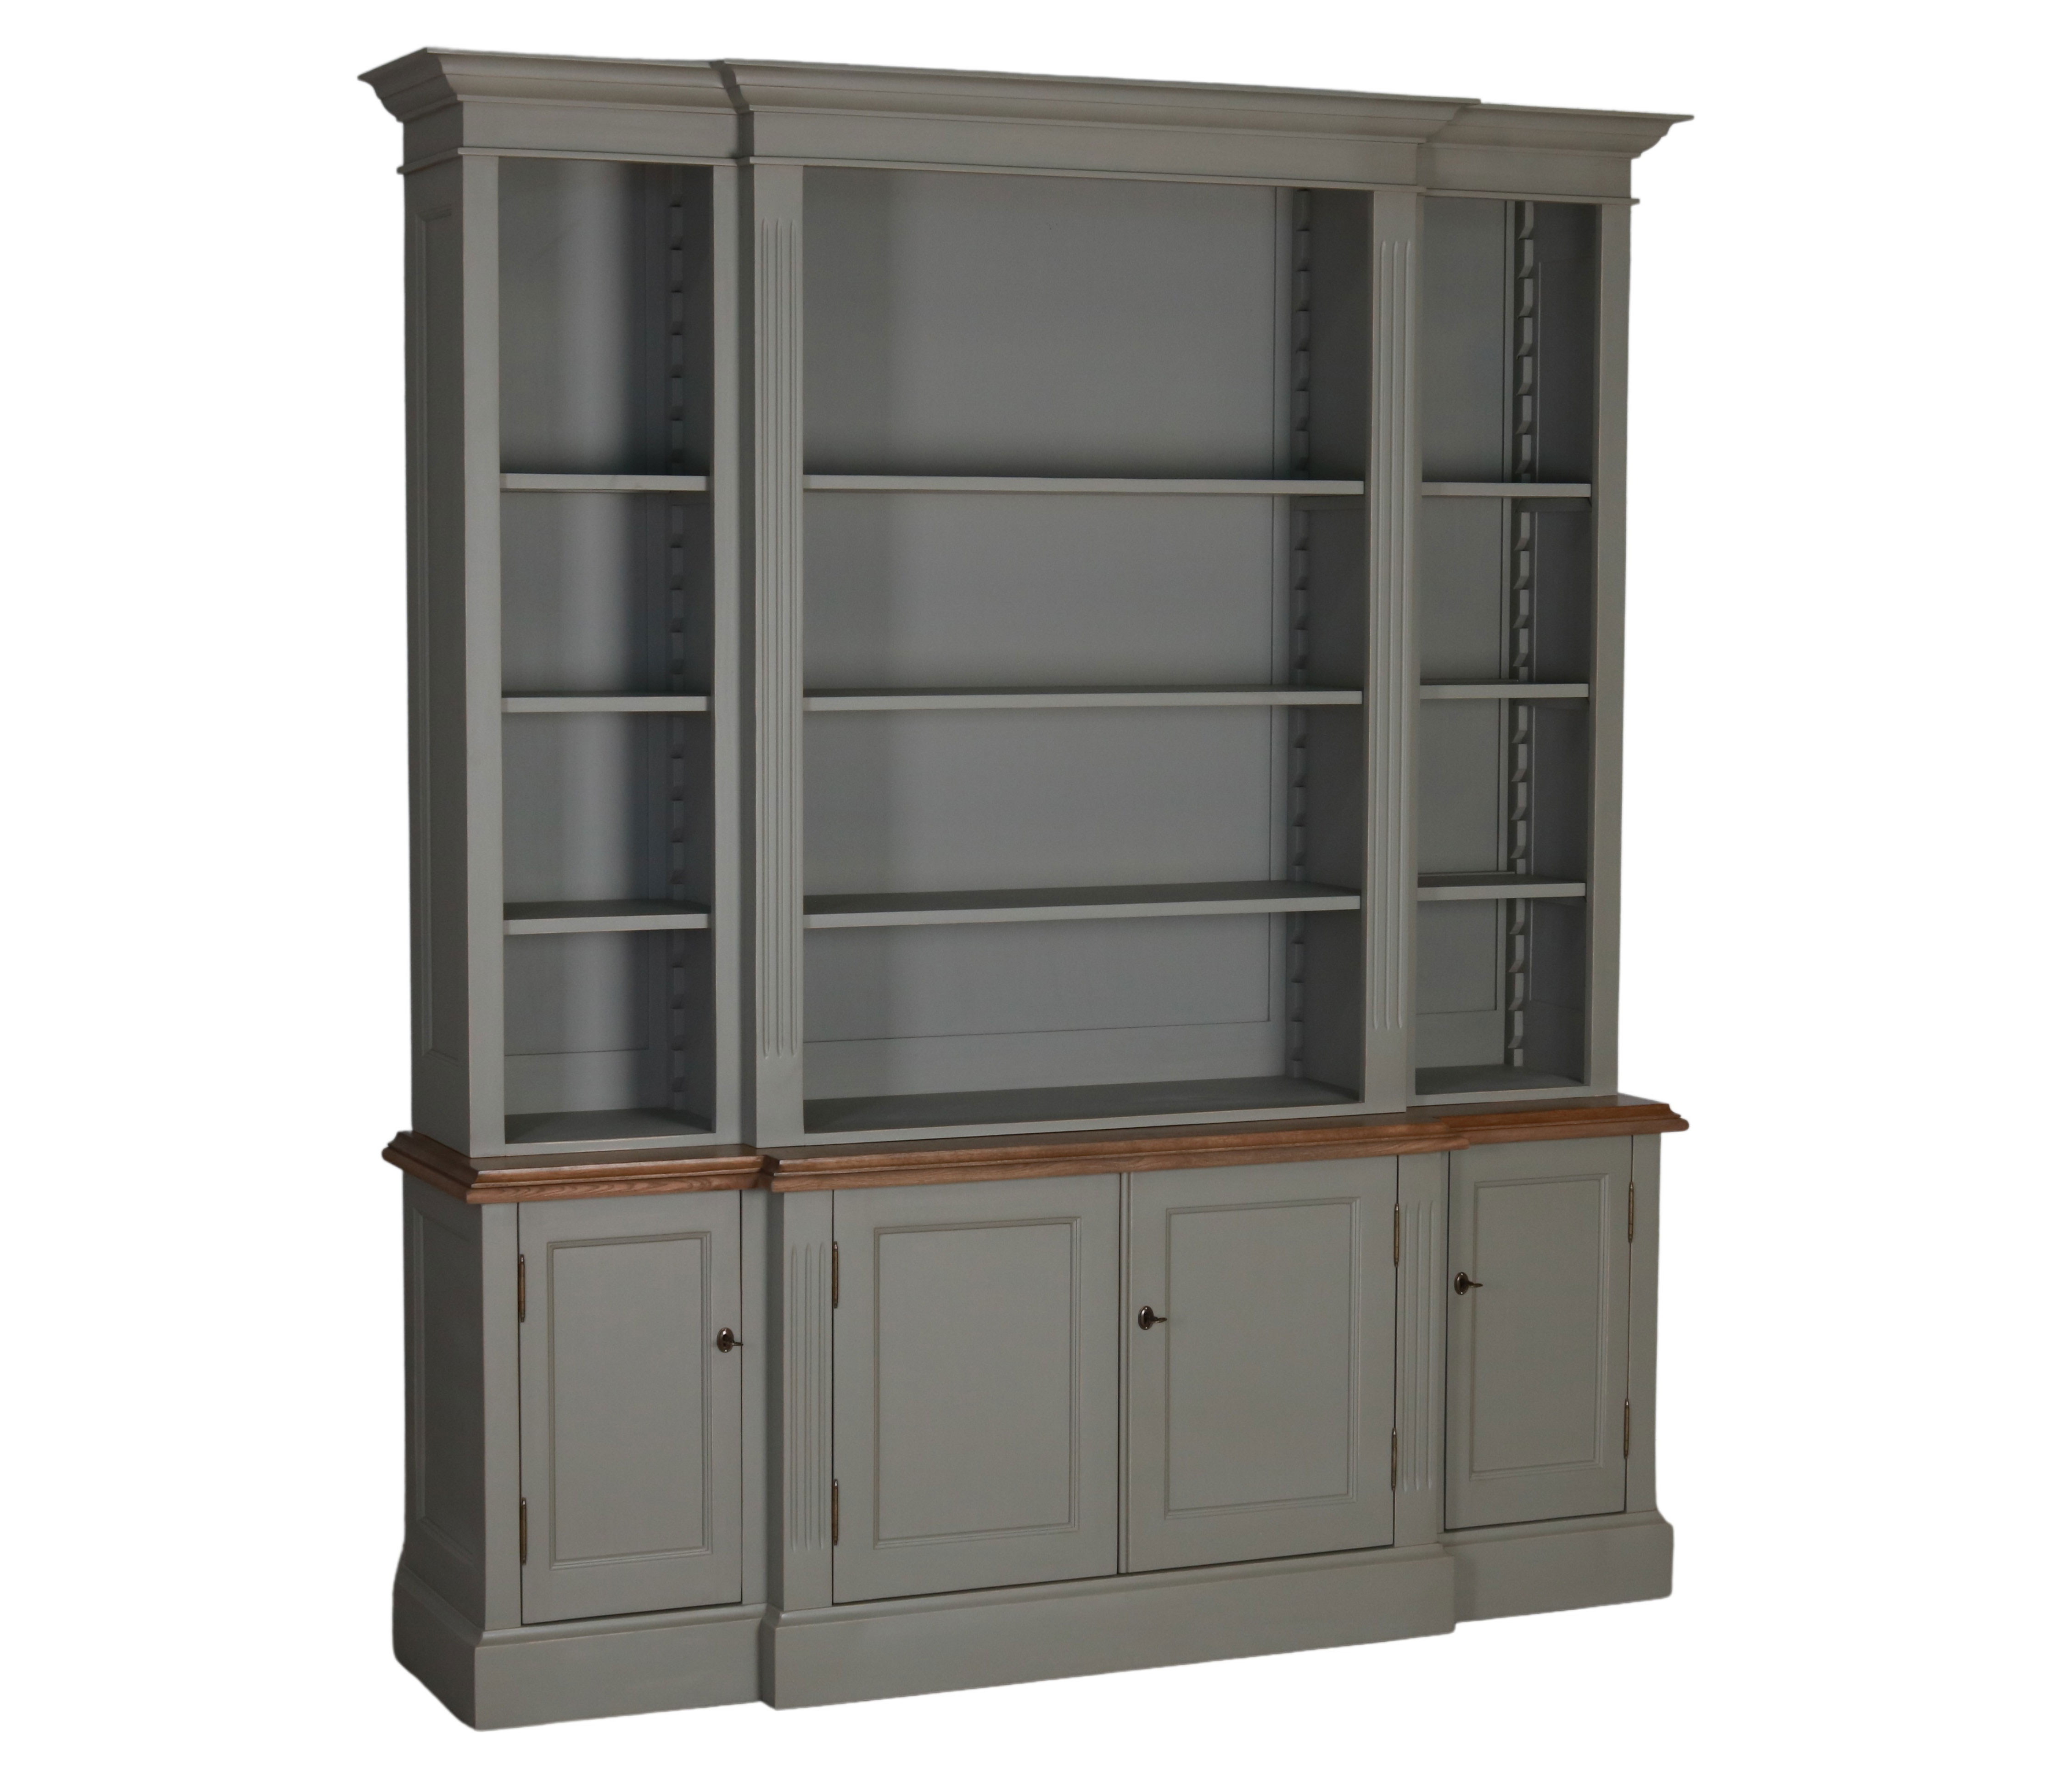 ECS breakfront bookcase in Biscuit and weathered oak 